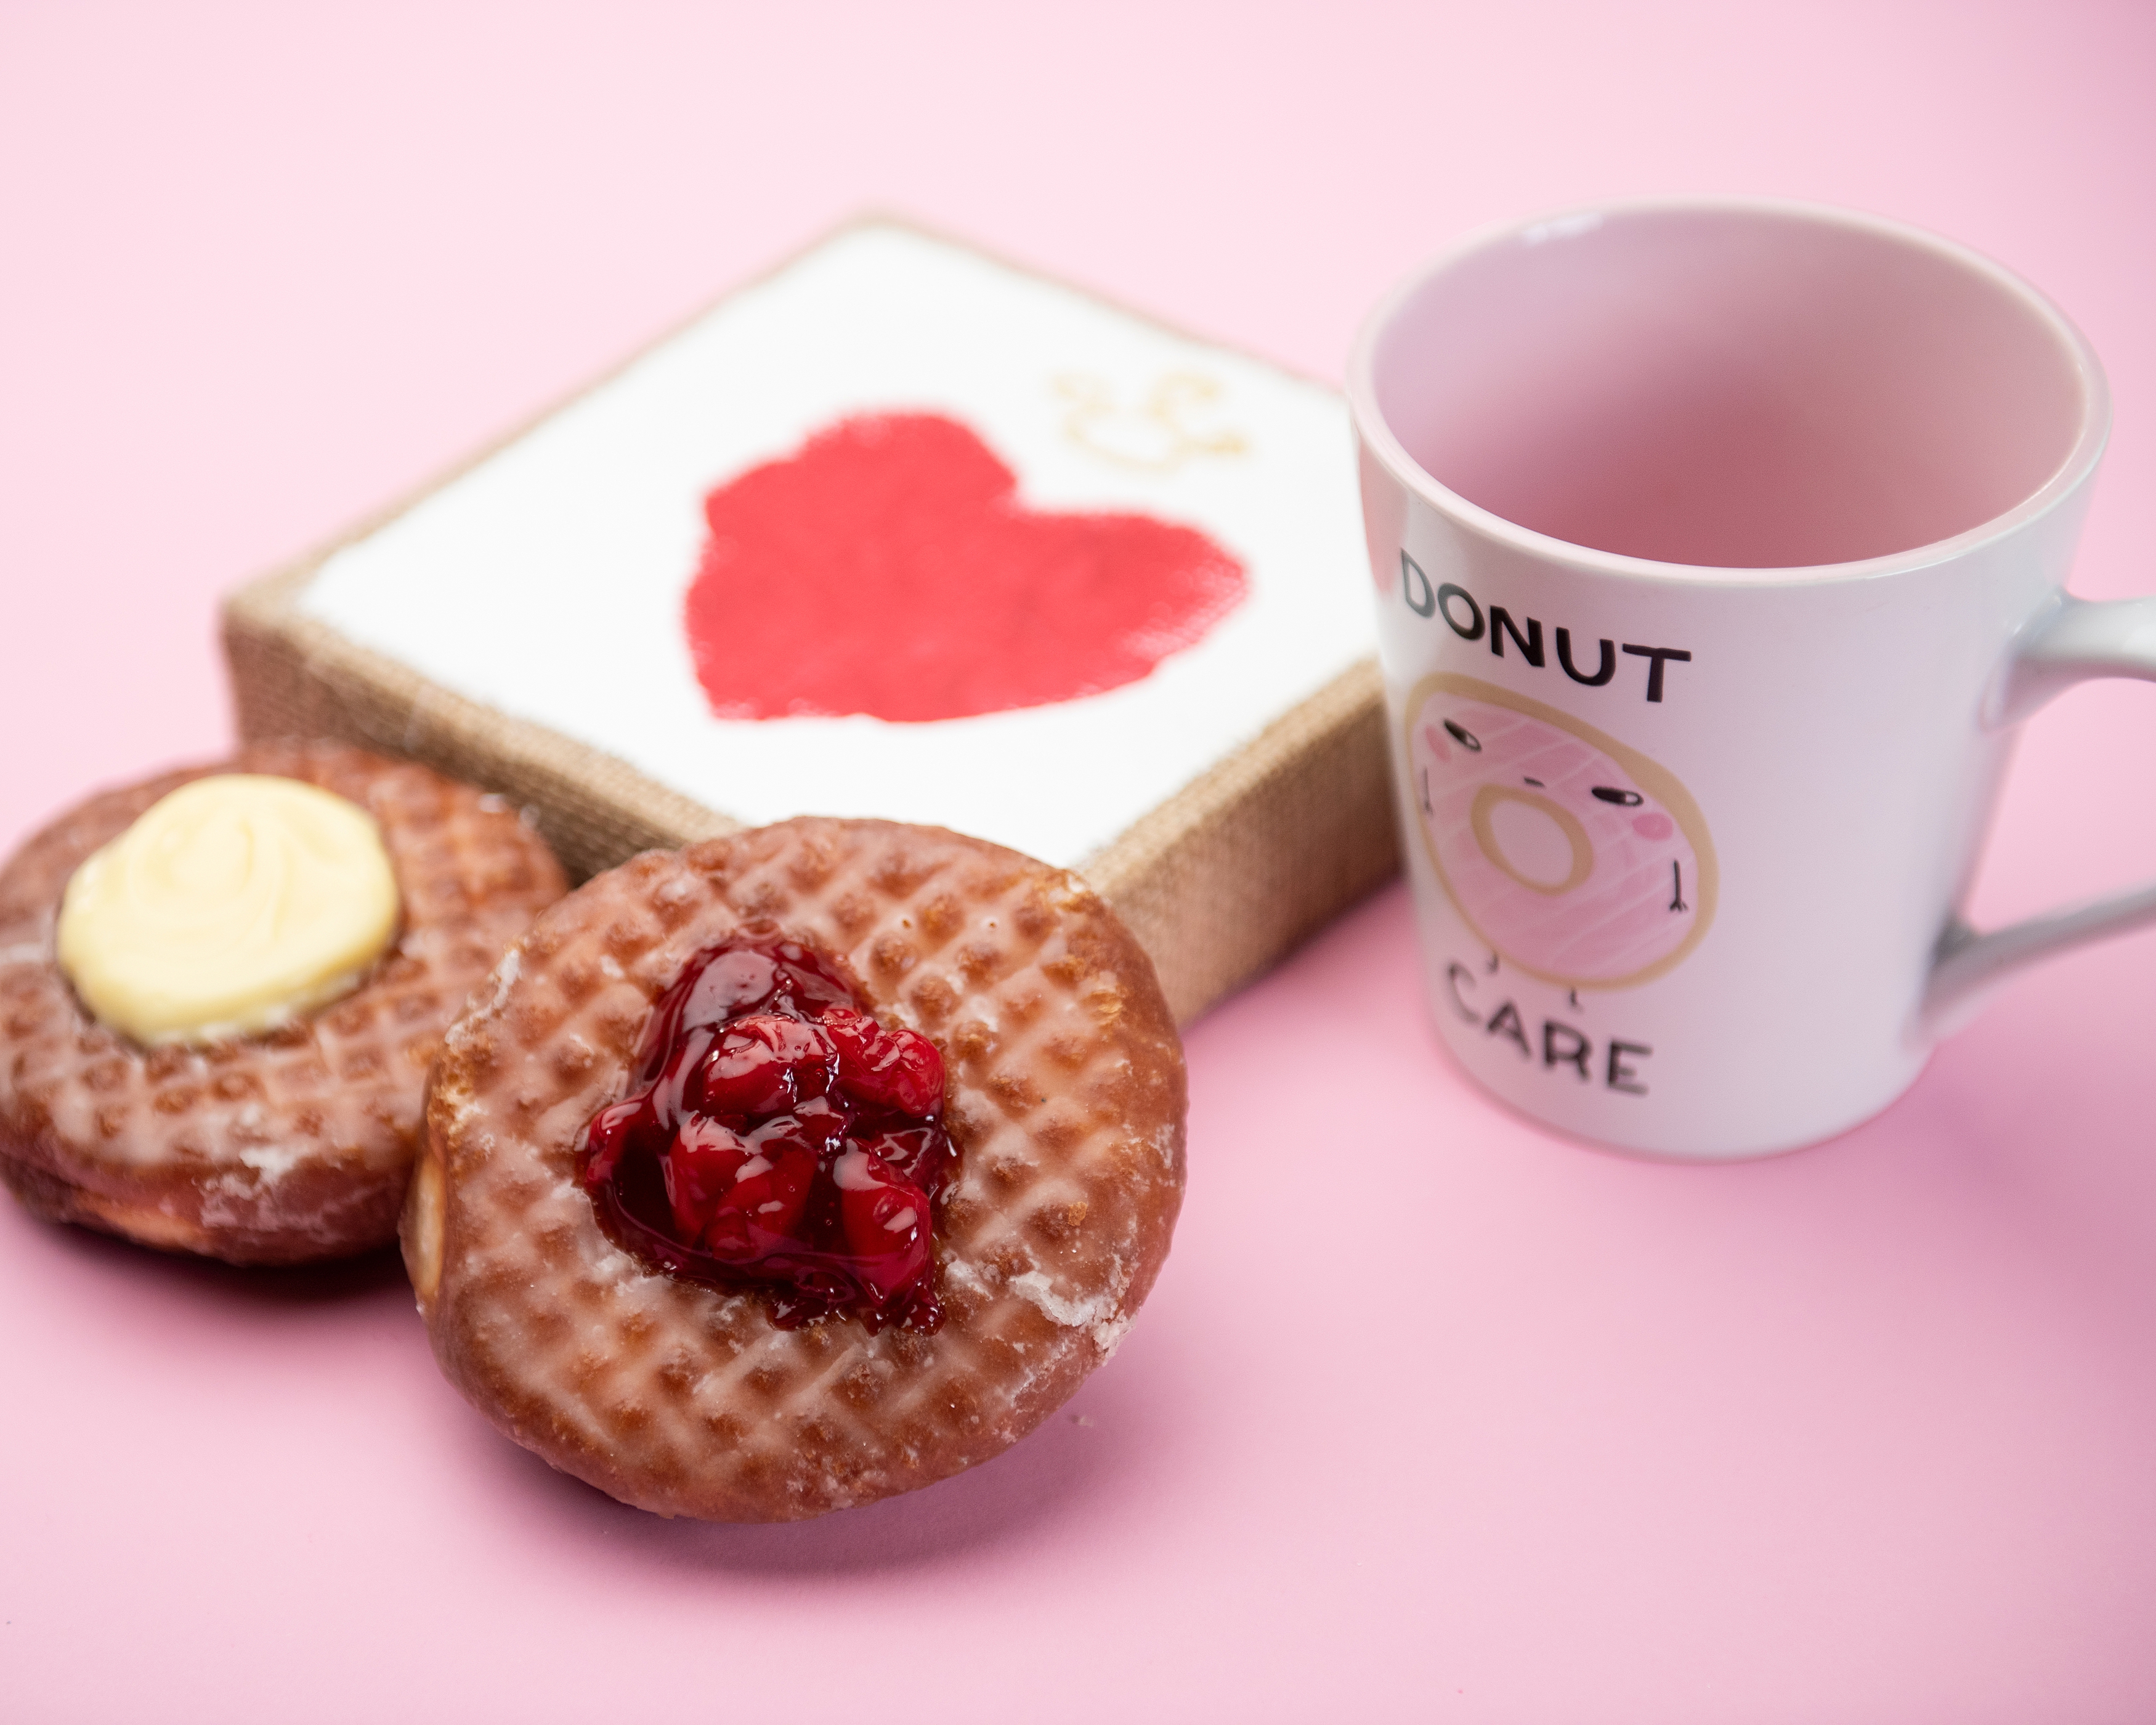 Valentines day donuts and pastrys at Cle Elum Bakery, commercial photography by Mary Maletzke